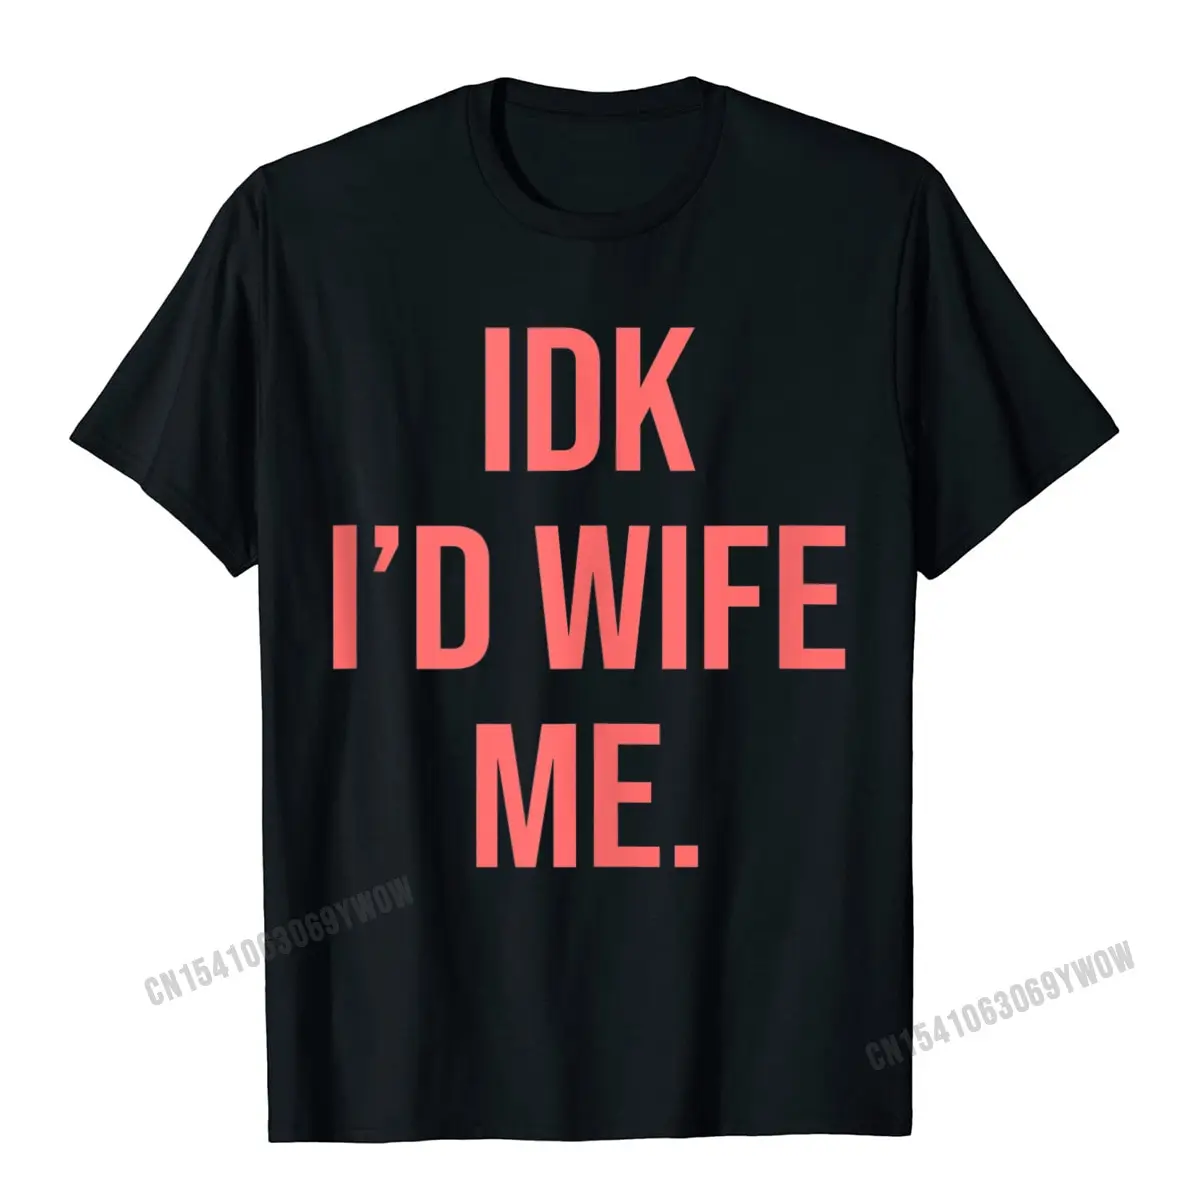 

IDK Id Wife Me Humor Words Gift Top Camisas Men Cotton Tops & Tees For Male Custom Top T-Shirts Design Hot Sale